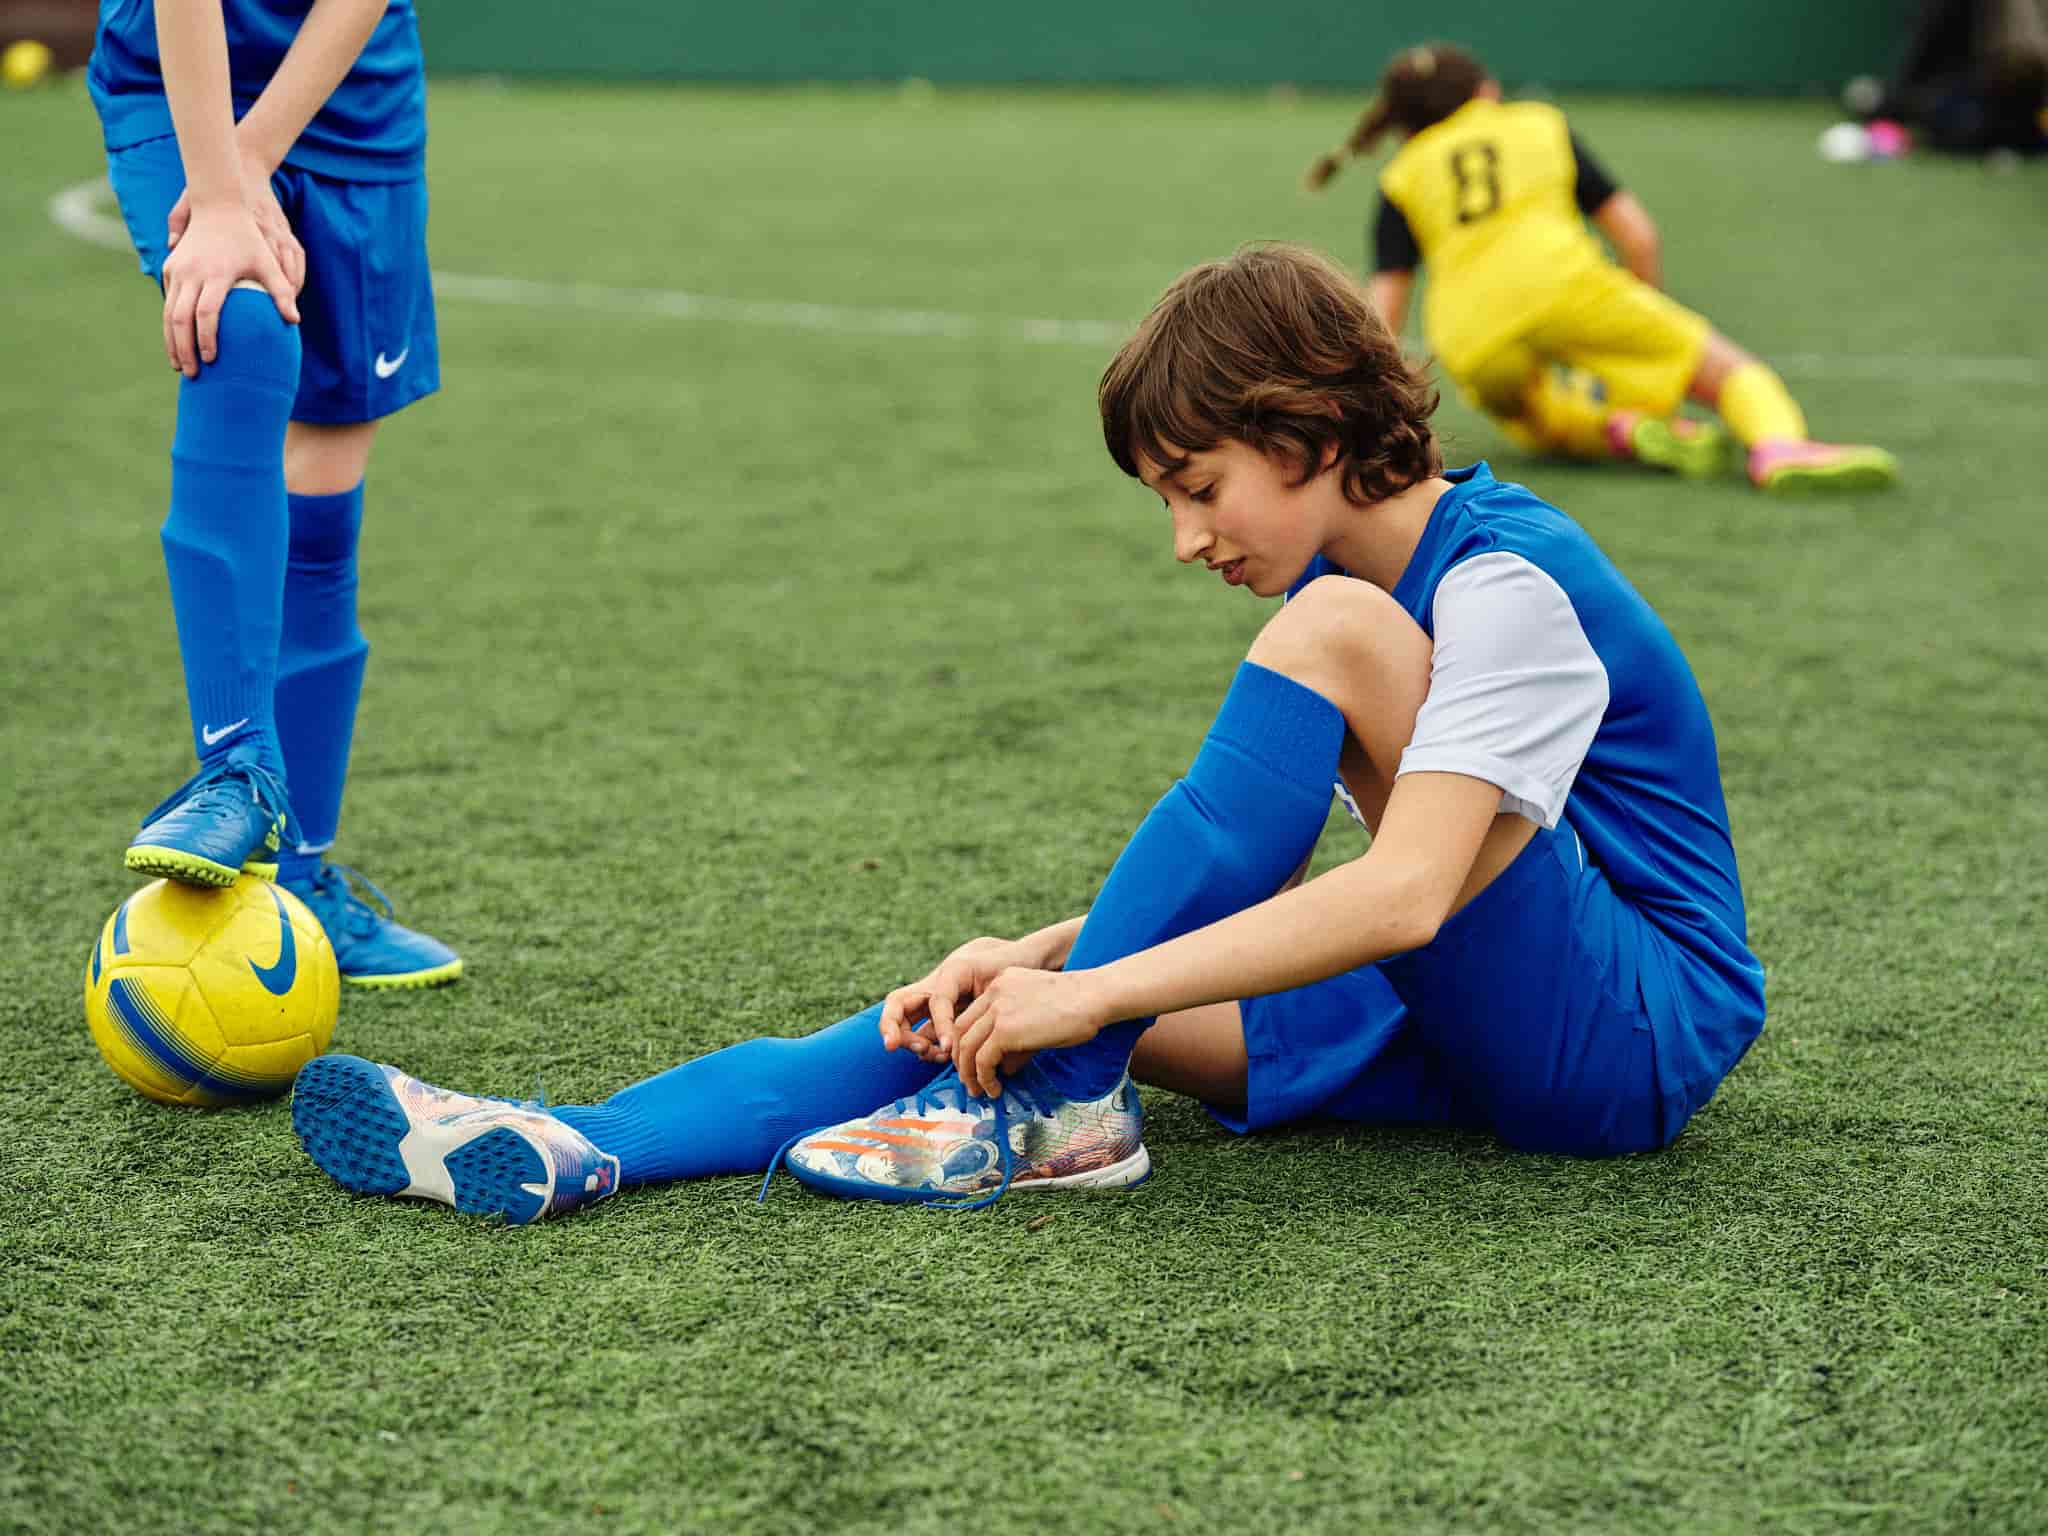 A girl sitting on the grass tying the laces of a football shoe.